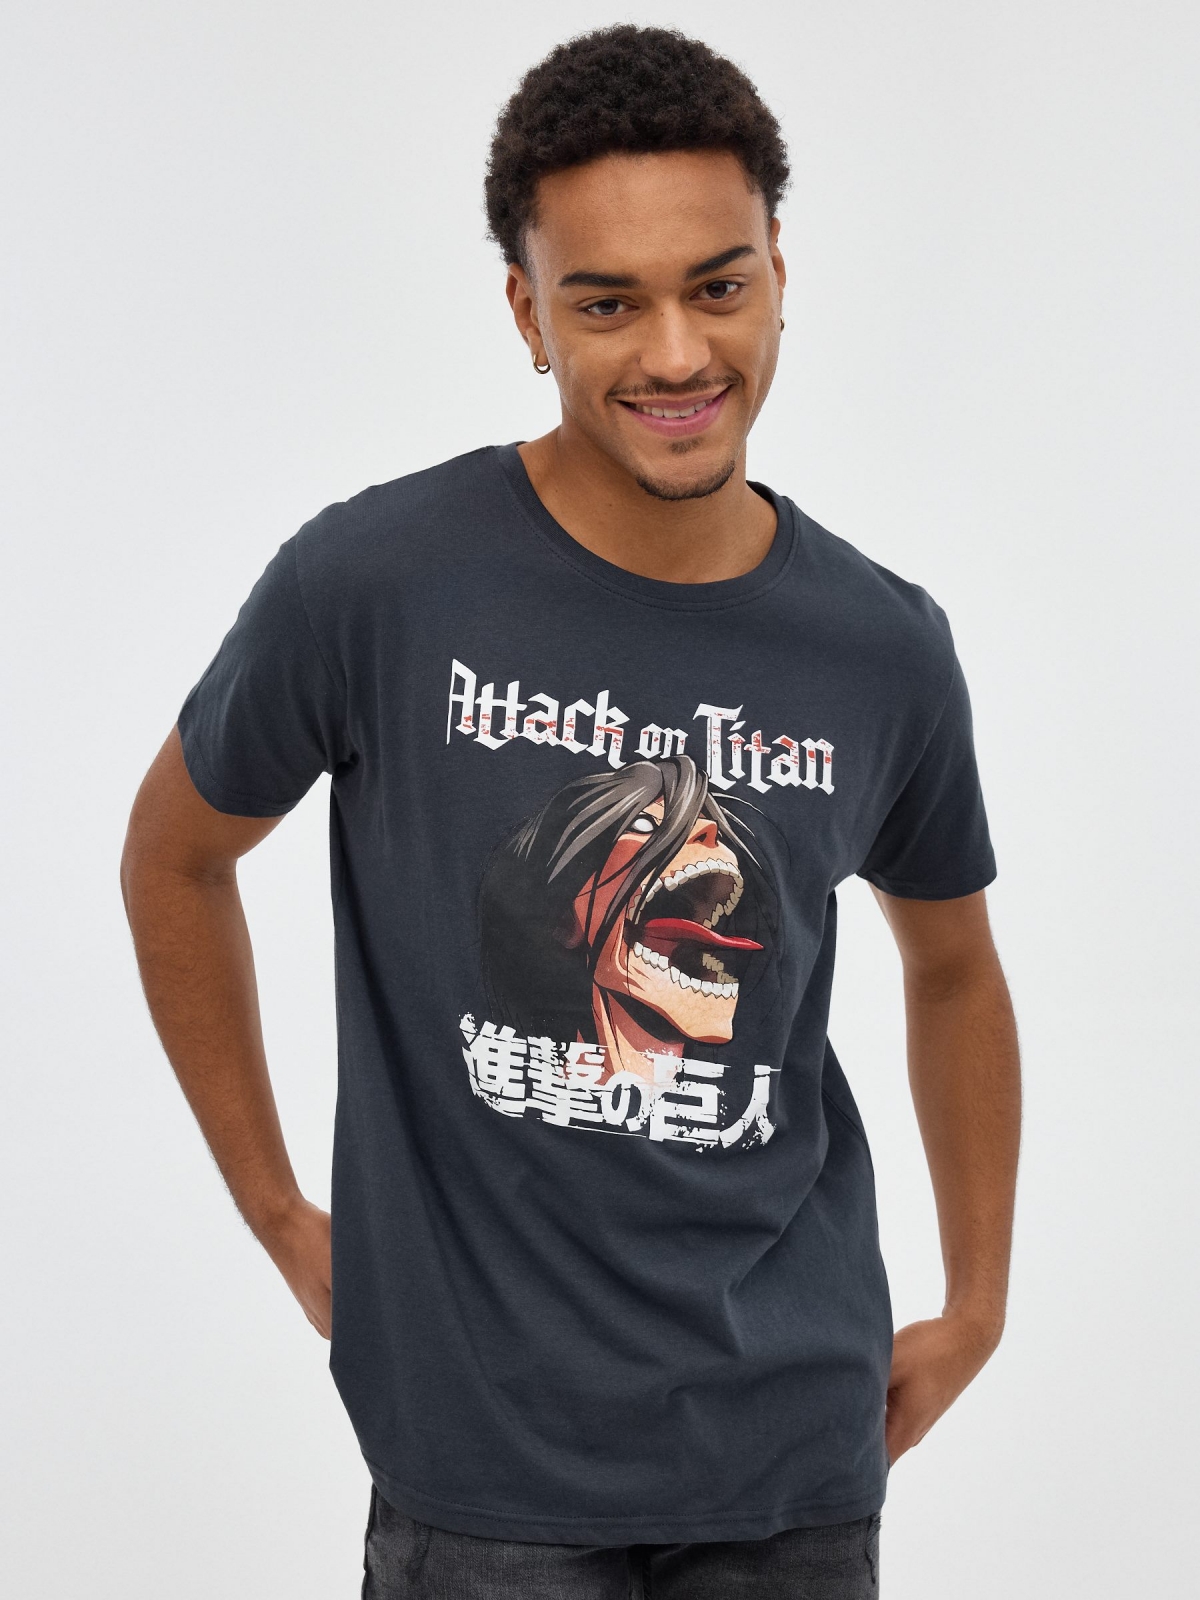 Attack on Titan printed t-shirt dark grey middle front view